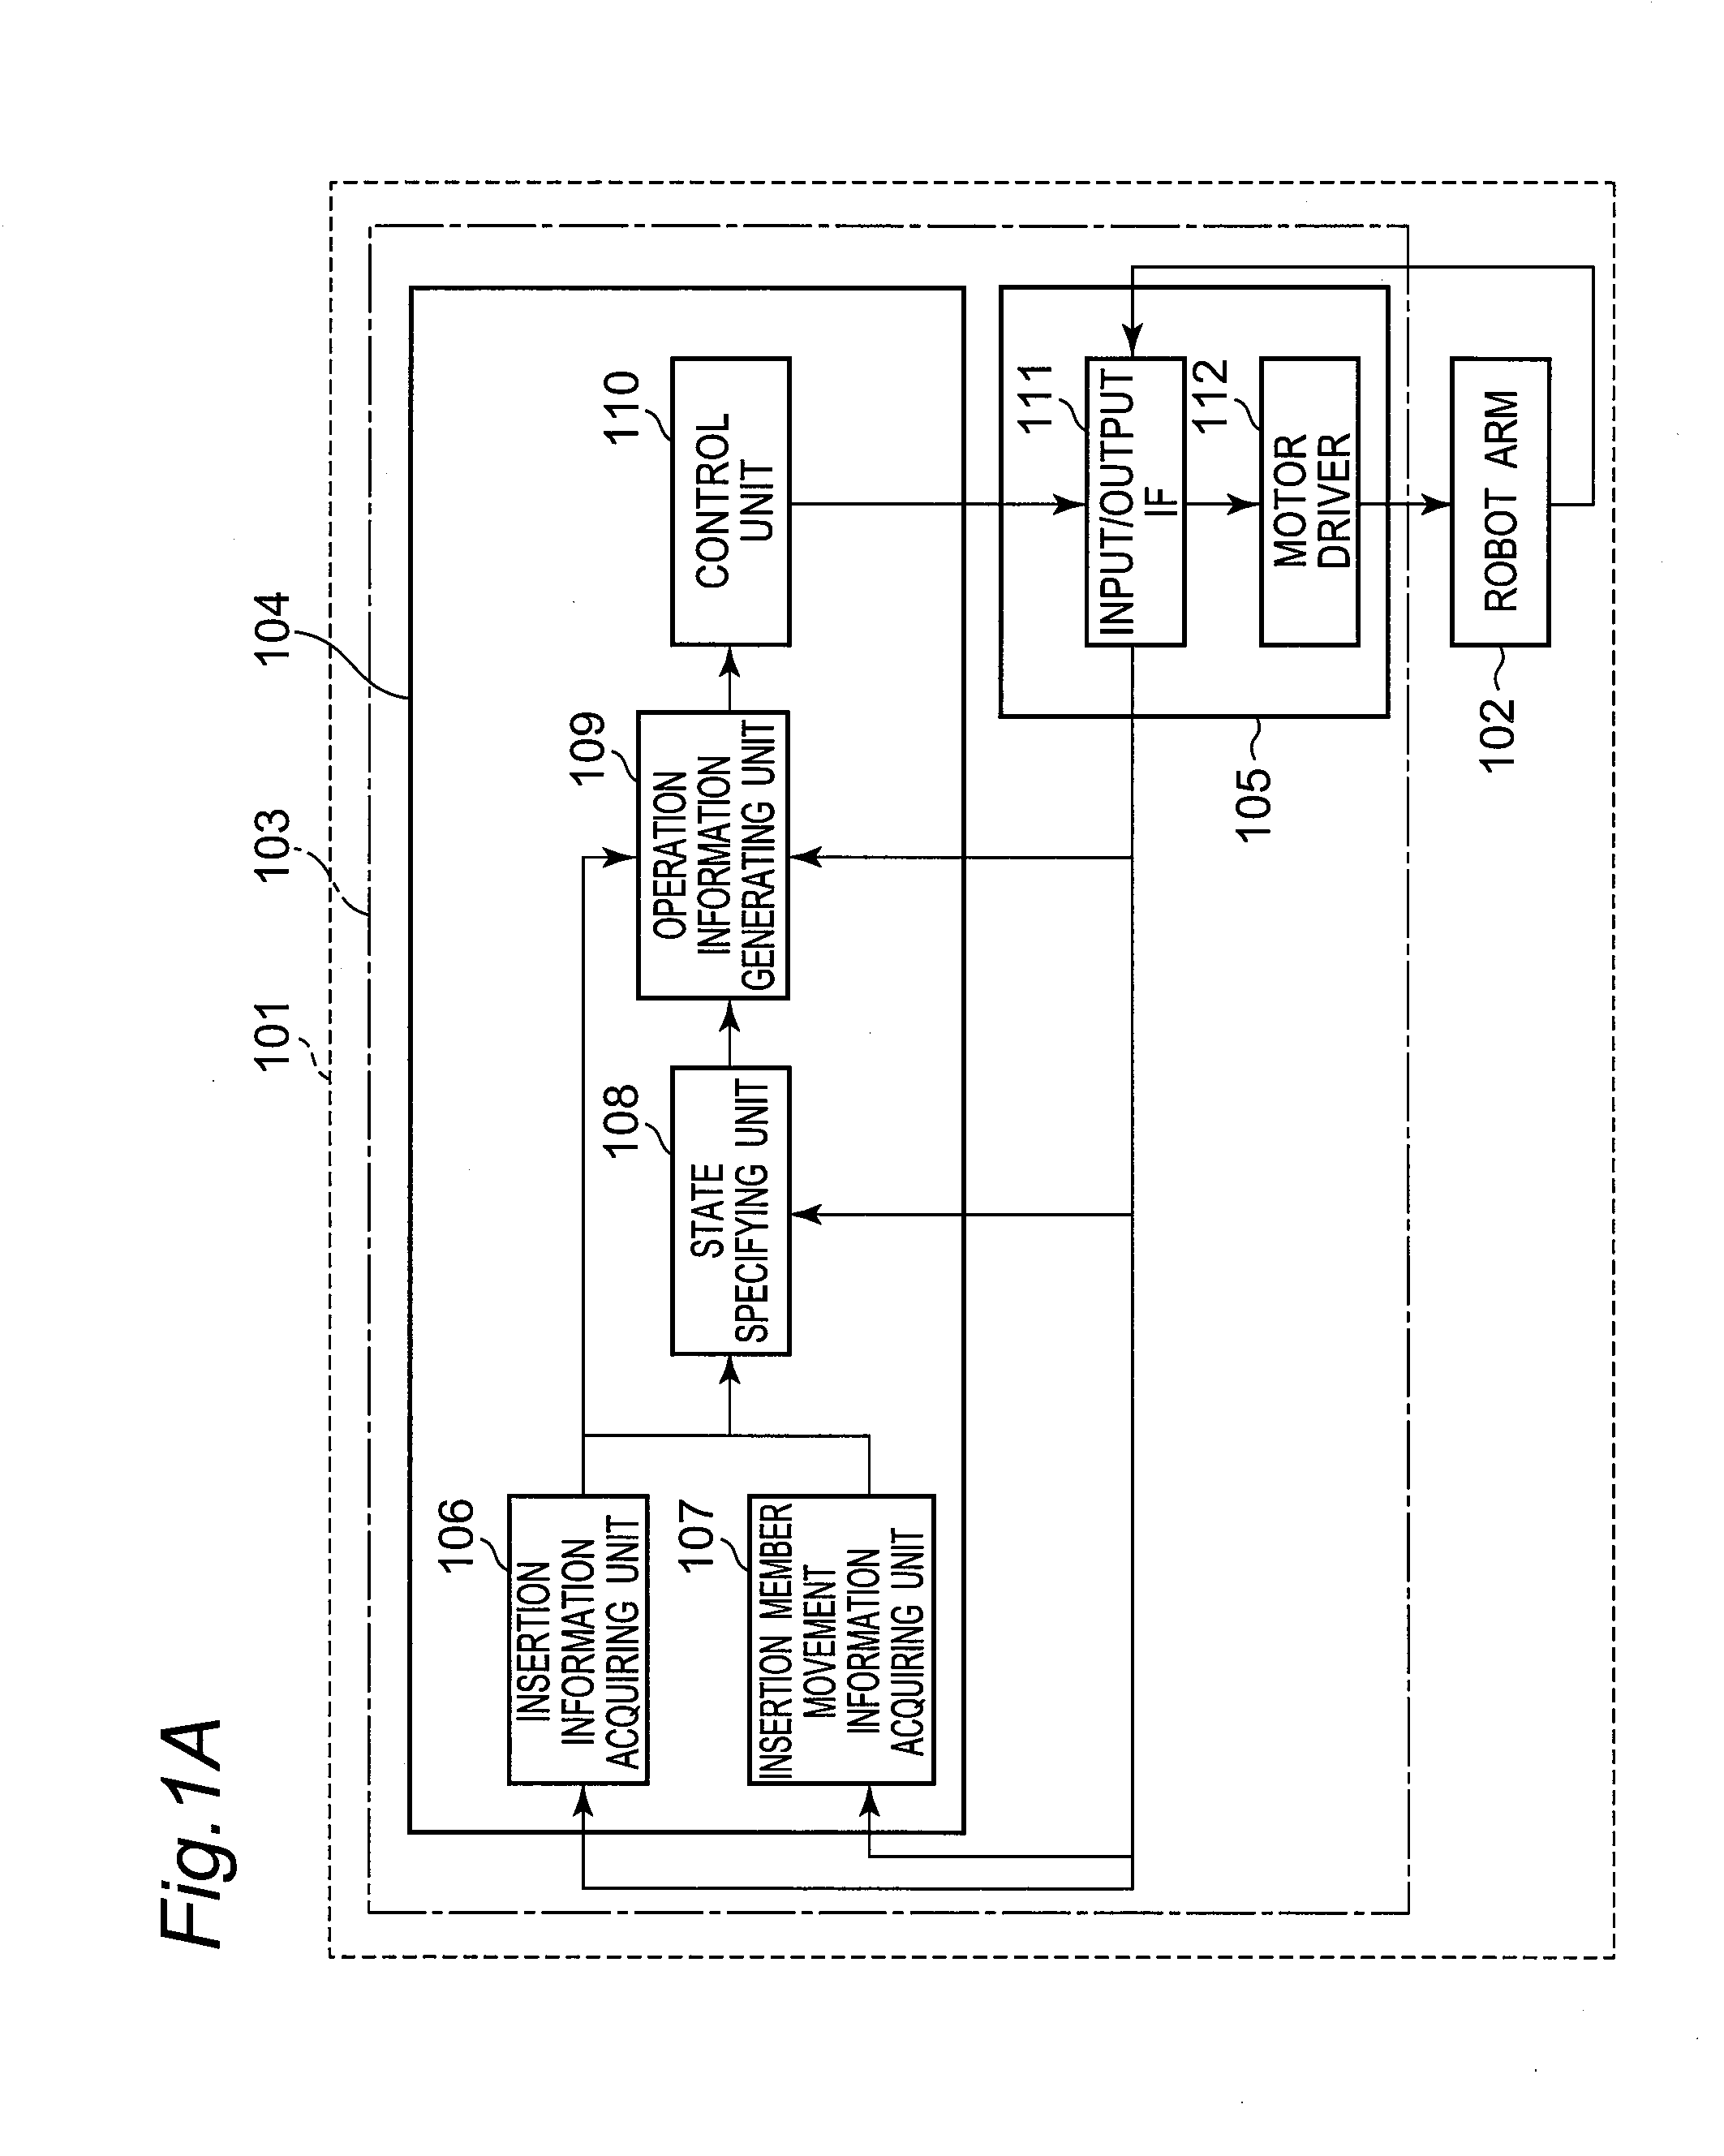 Control apparatus and control method of insertion apparatus, insertion apparatus having control apparatus, control program for insertion apparatus, and controlling integrated electronic circuit of insertion apparatus